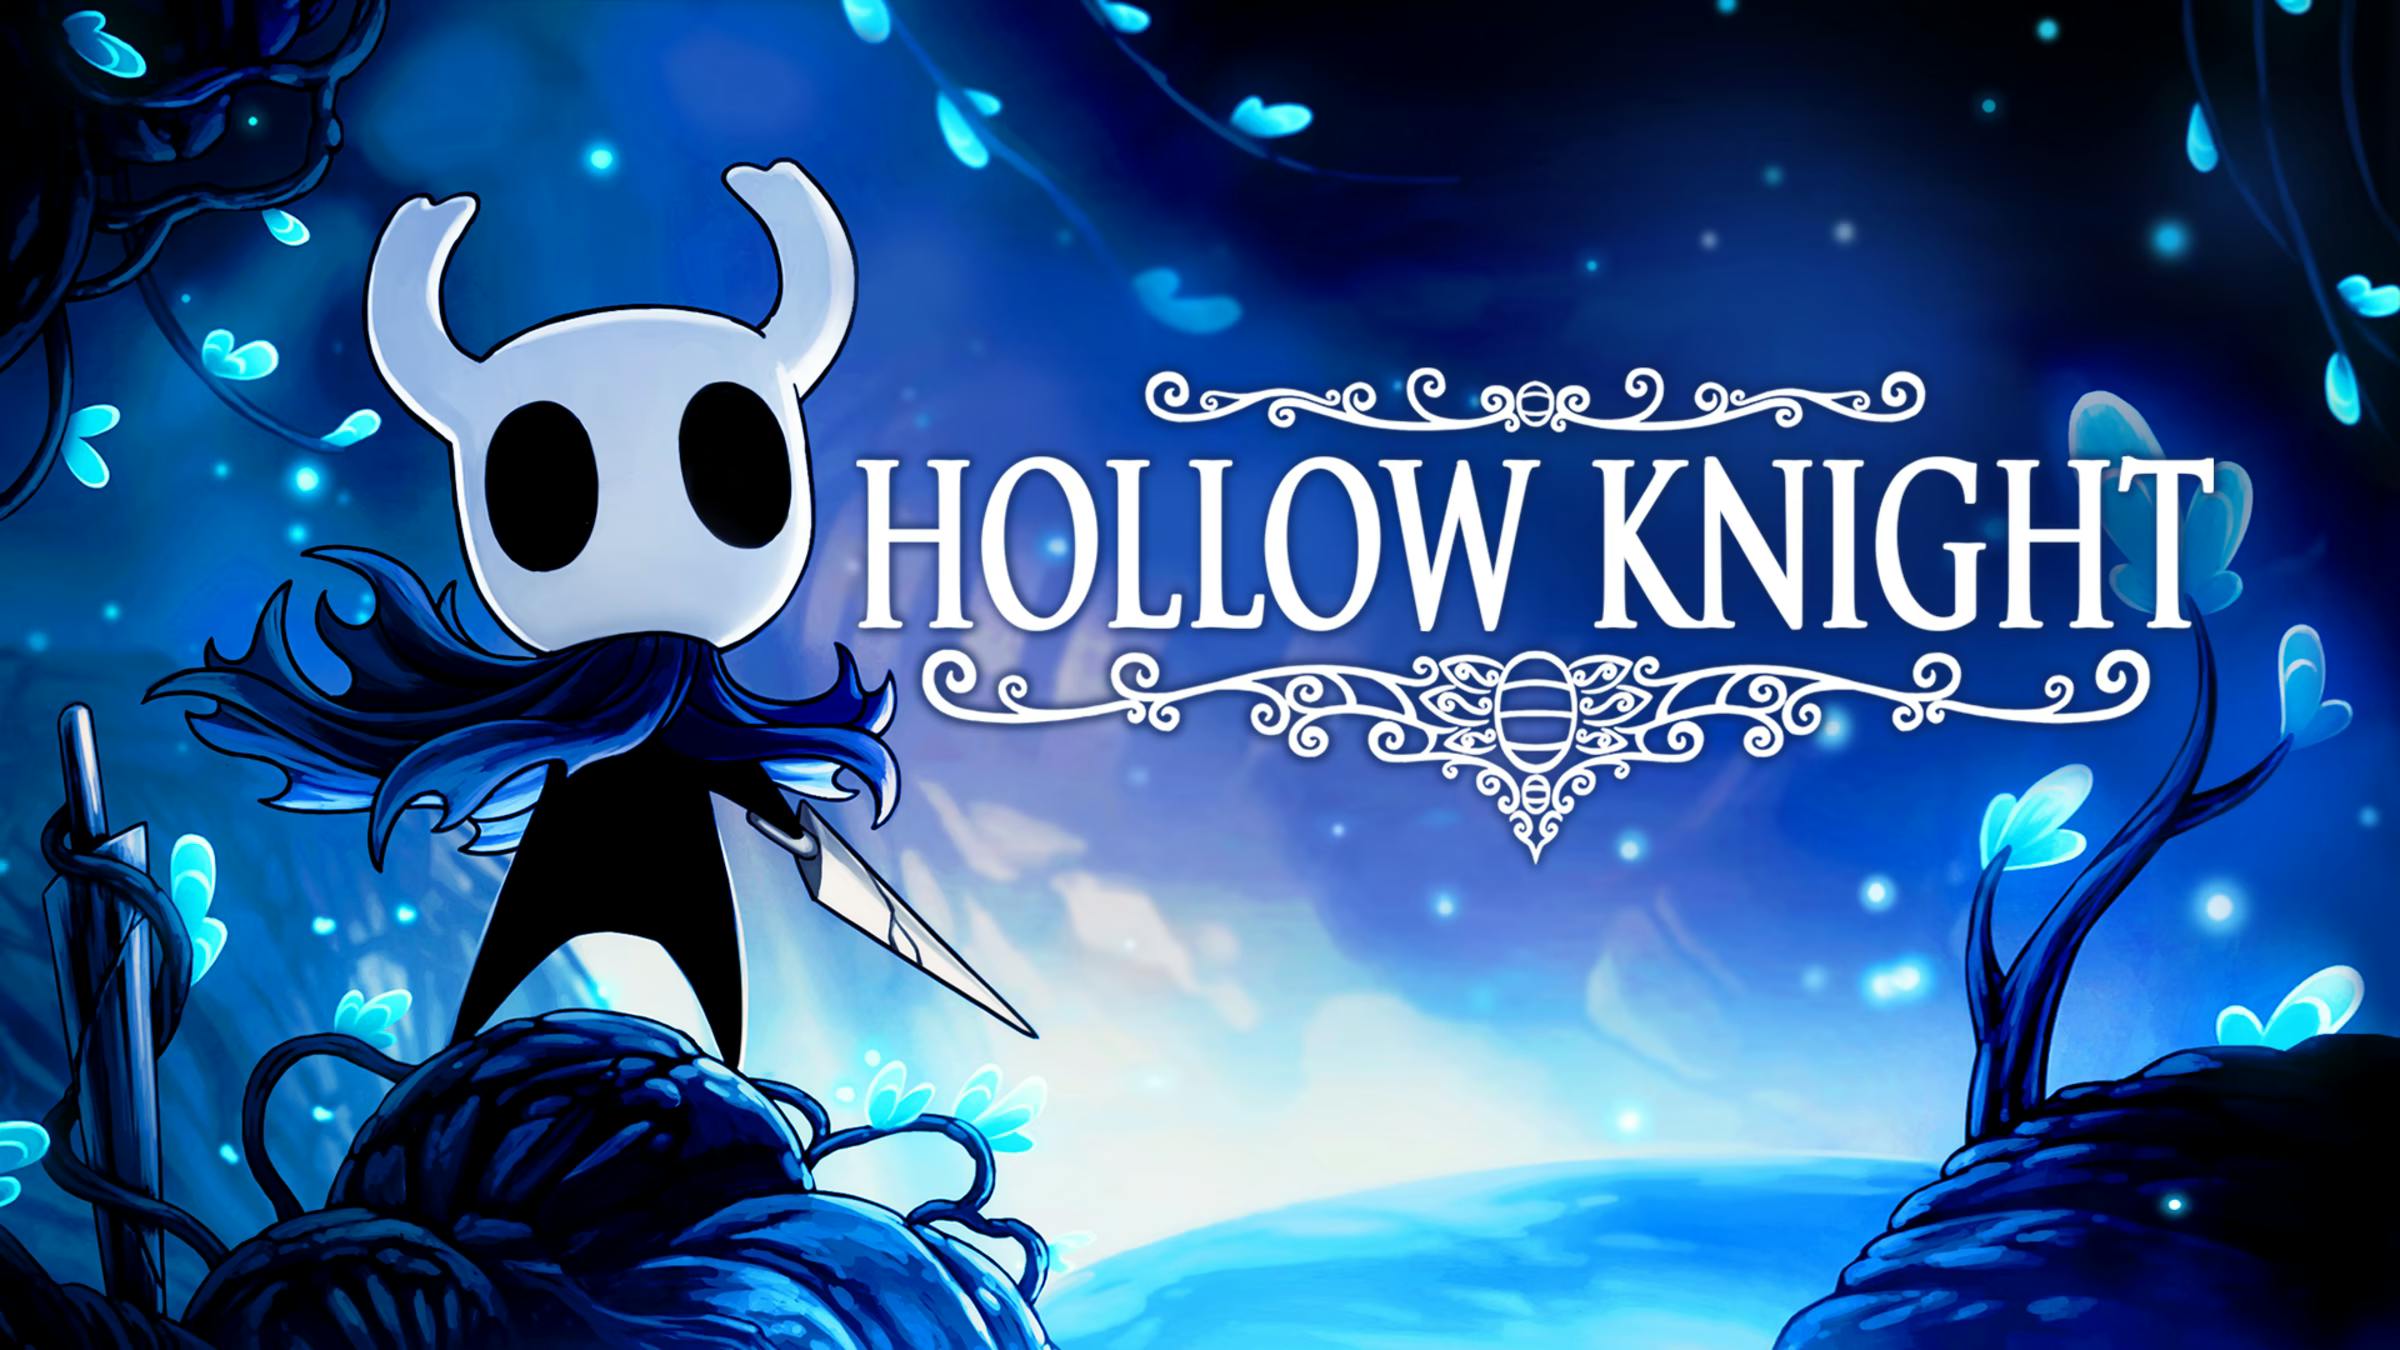 "Hollow Knight" from developers Team Cherry has a unique and consistent social media presence that keeps people engaged with their game despite having a long development cycle. 